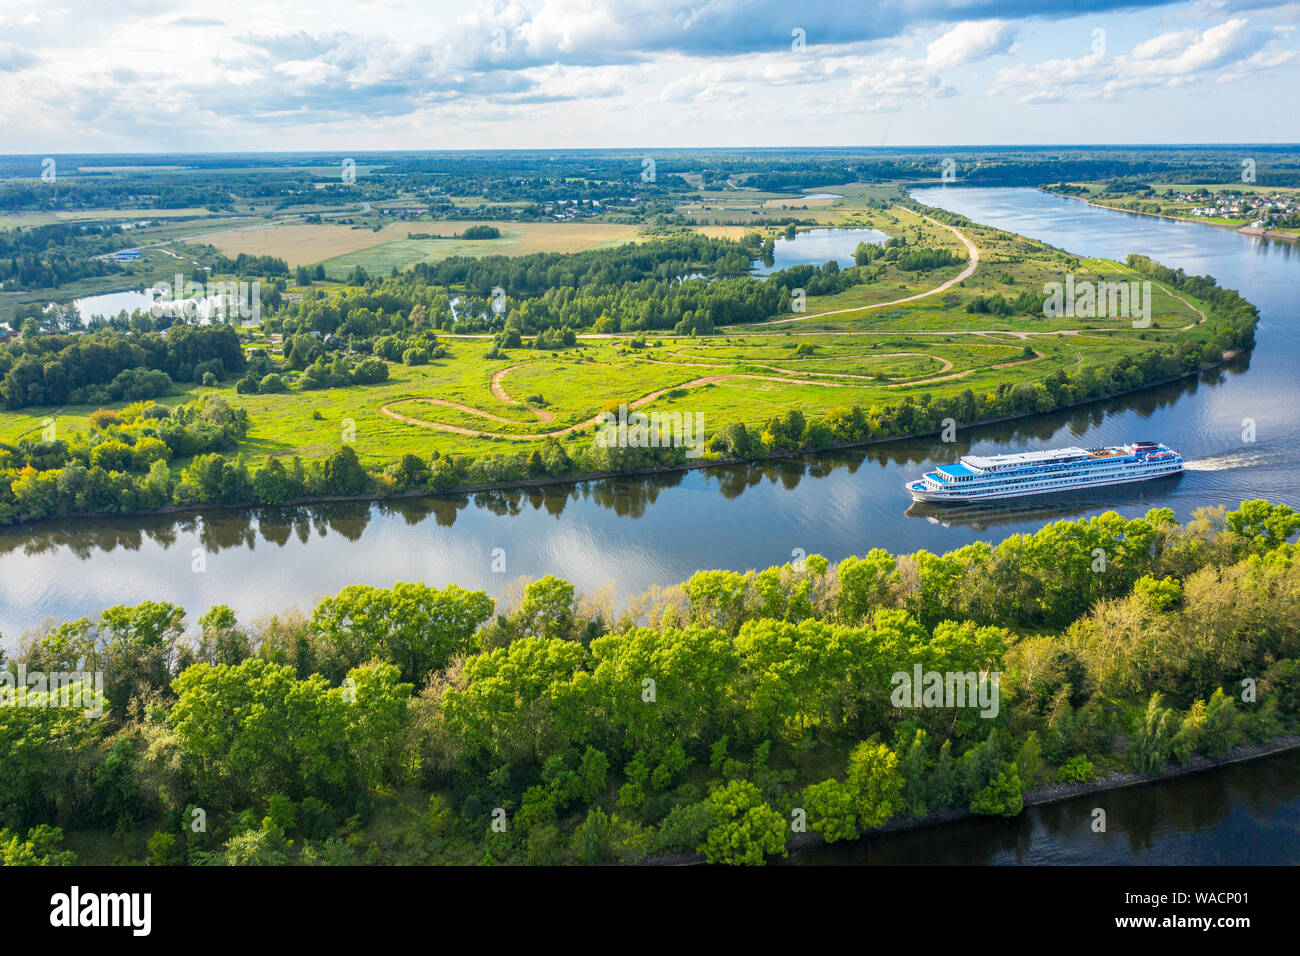 The Volga River, Russia. Tourist steamer floating on the Volga river channel, view from the quadcopter Stock Photo